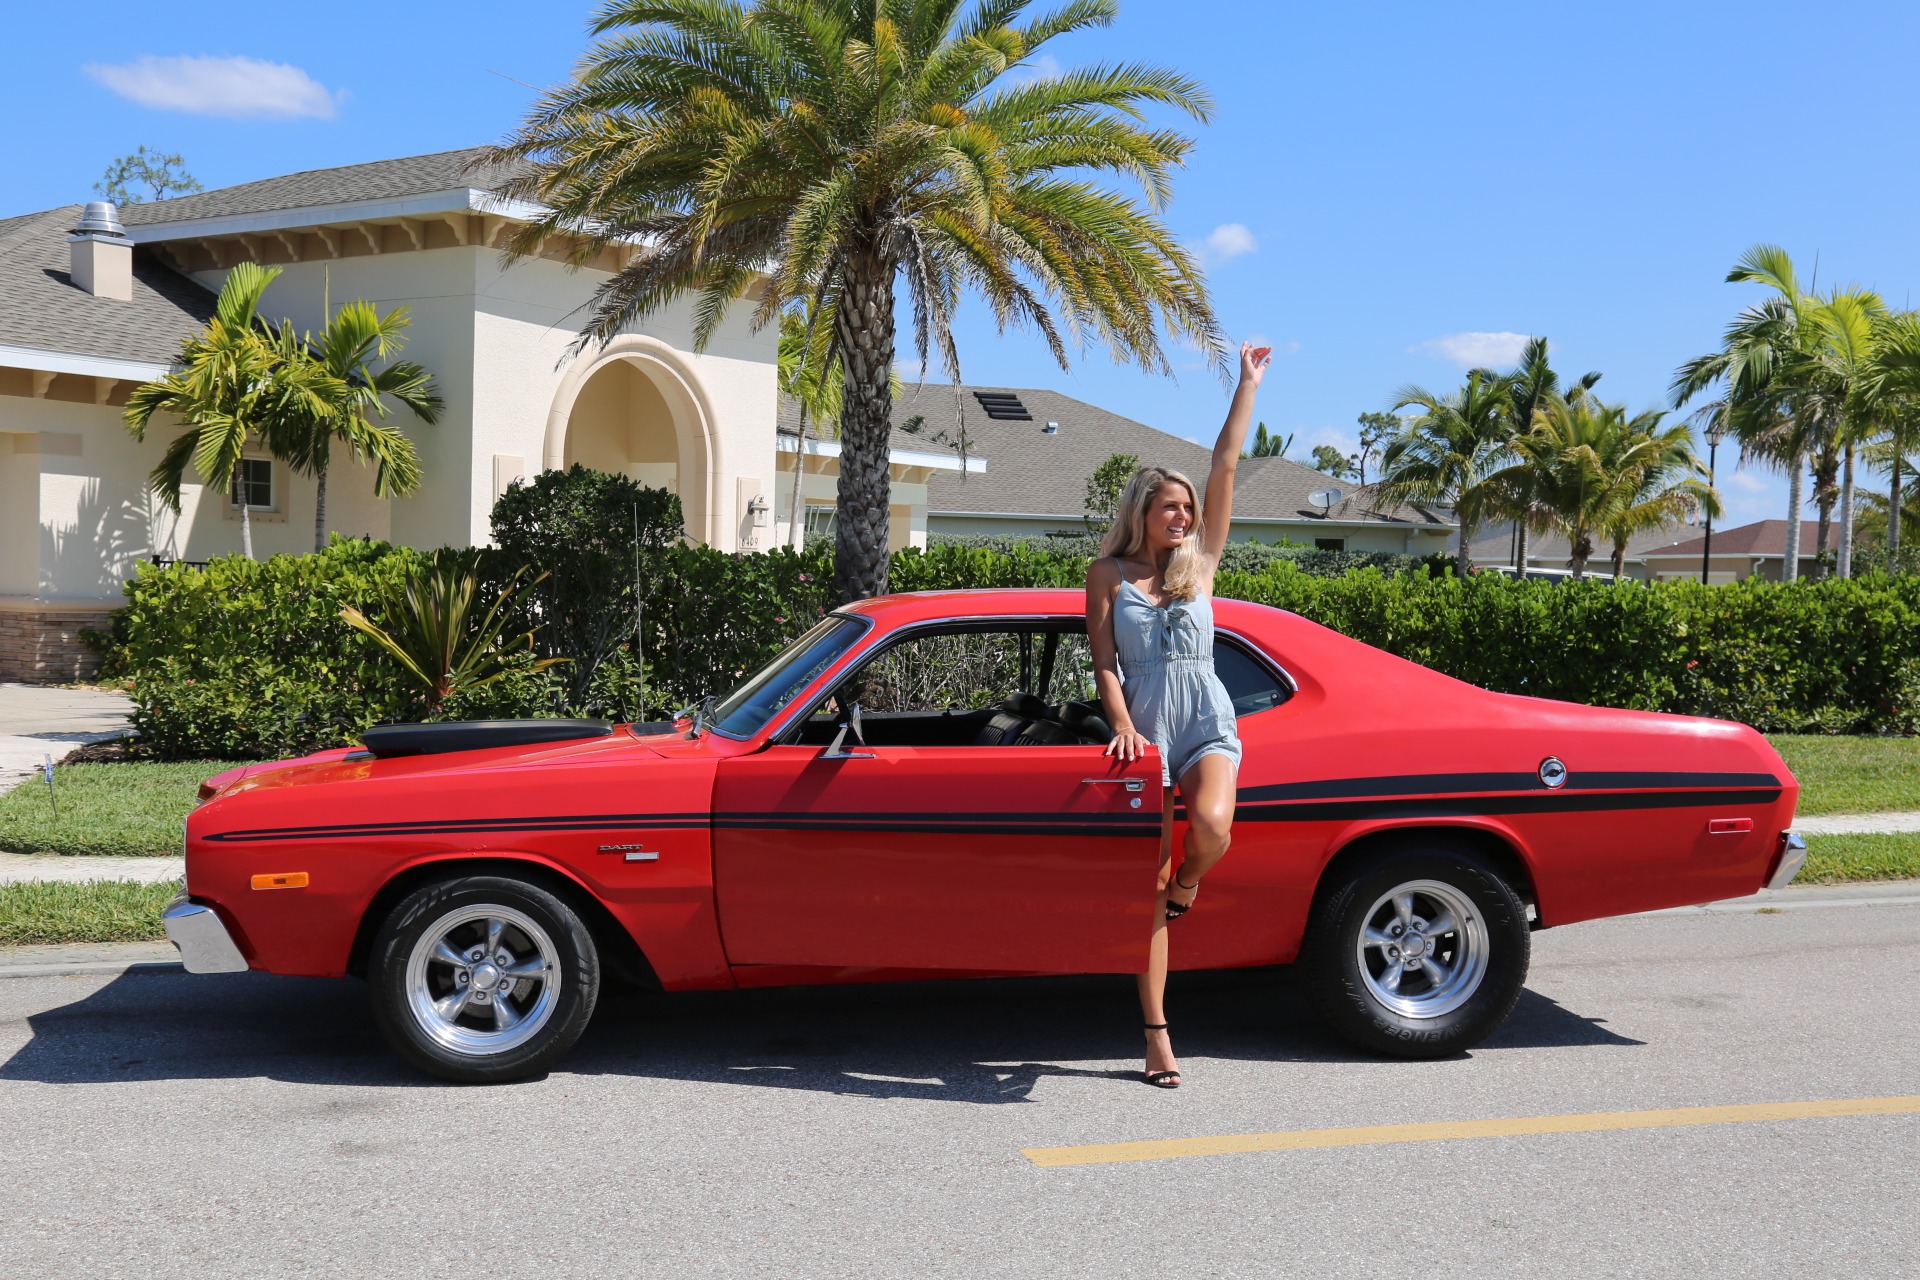 Used 1973 Dodge Dart Dart V8 Auto for sale Sold at Muscle Cars for Sale Inc. in Fort Myers FL 33912 4